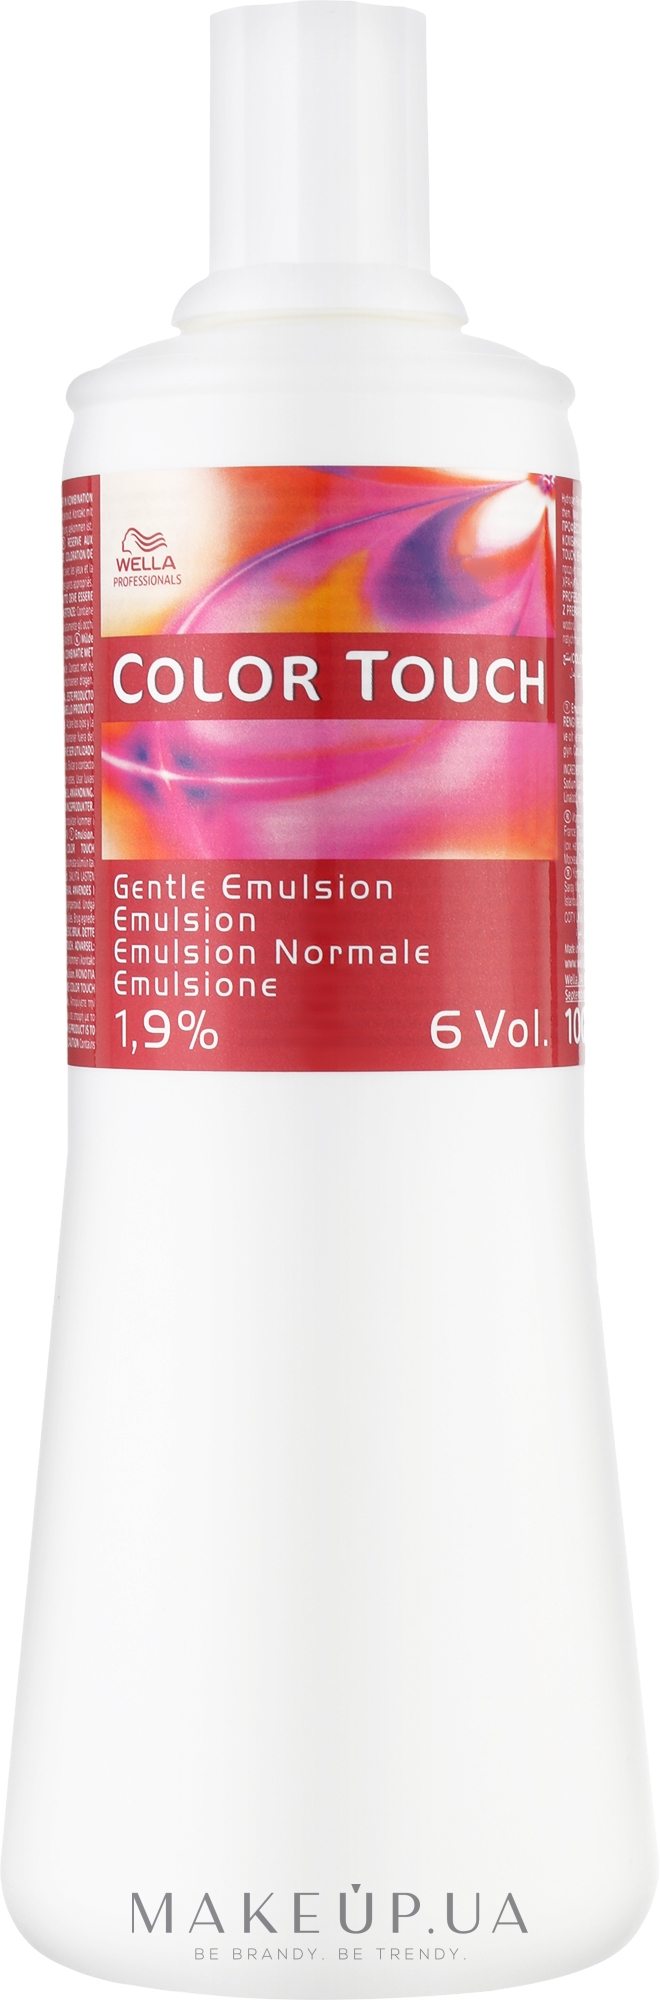 Емульсія для фарби Color Touch - Wella Professional Color Touch Emulsion 1.9% — фото 1000ml